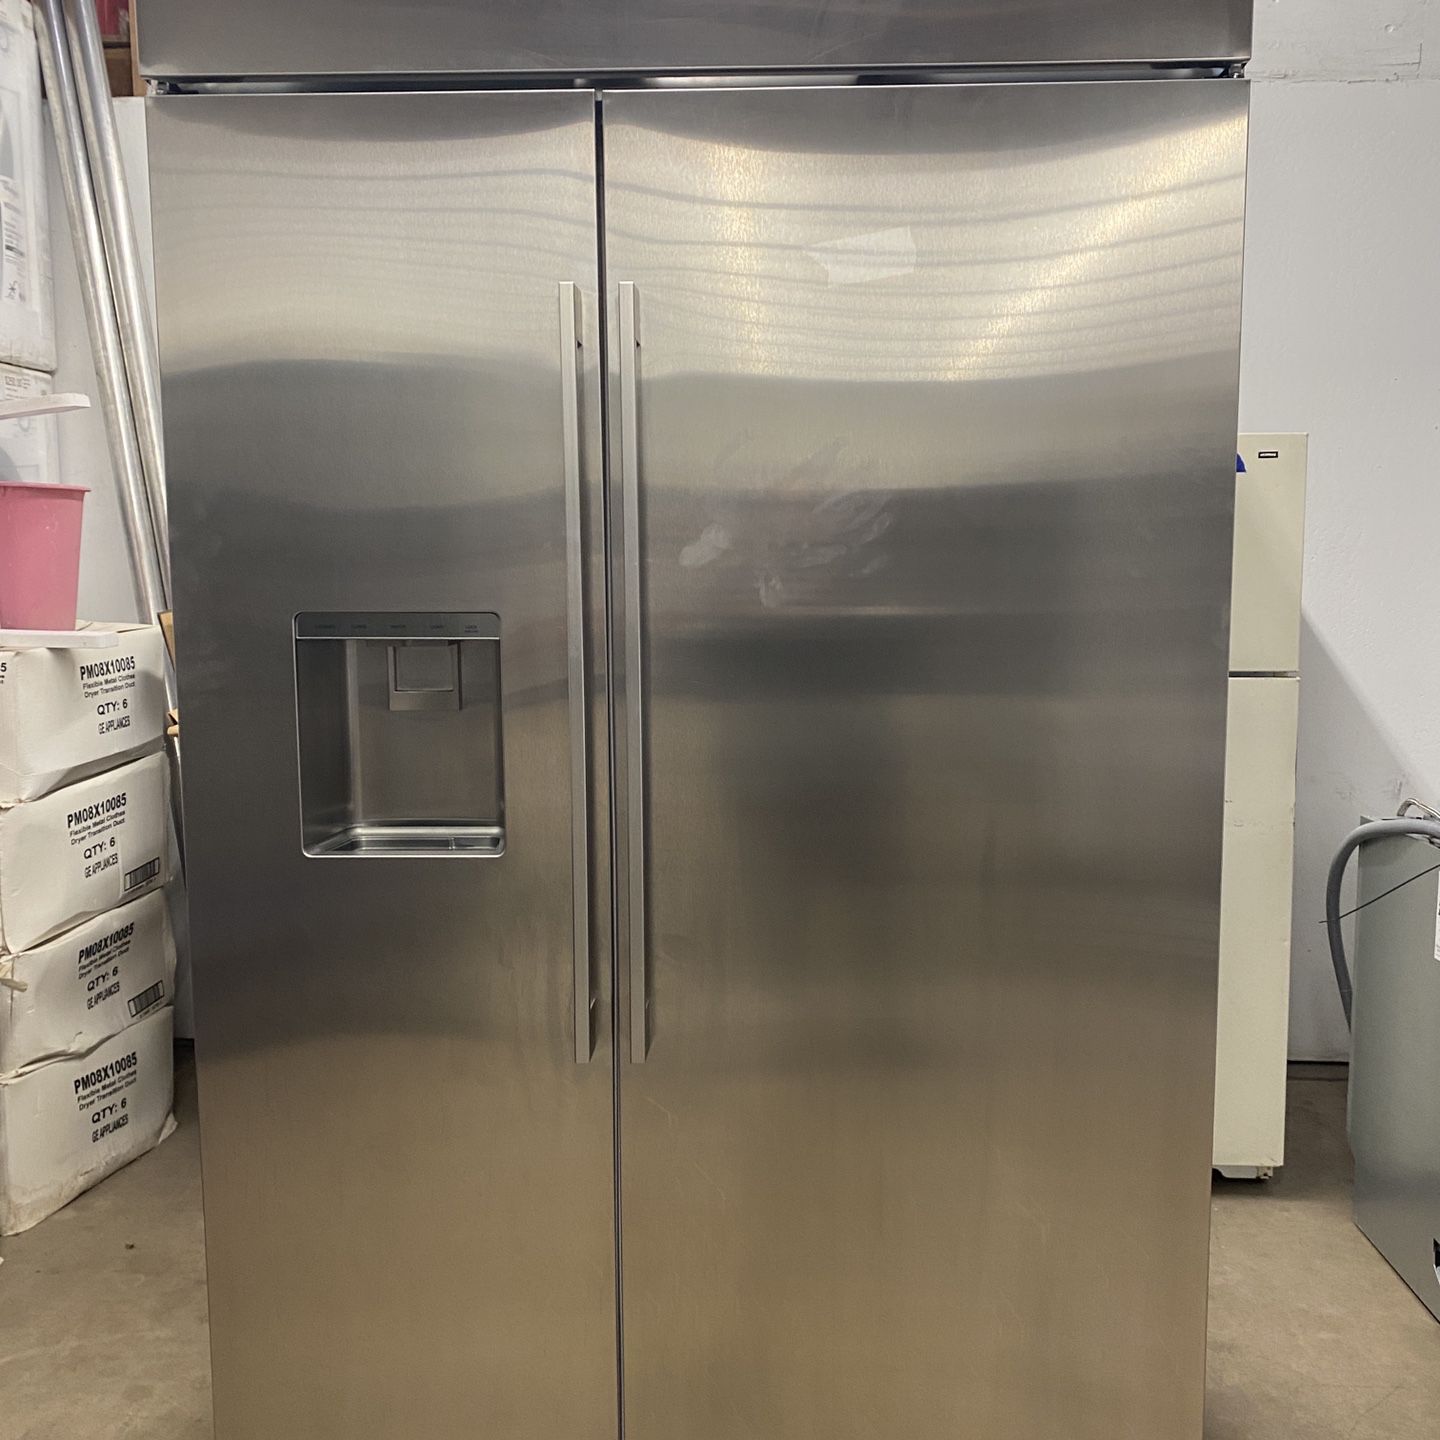 Stainless Steel GE Monogram Side By Side Built In Refrigerator and Freezer